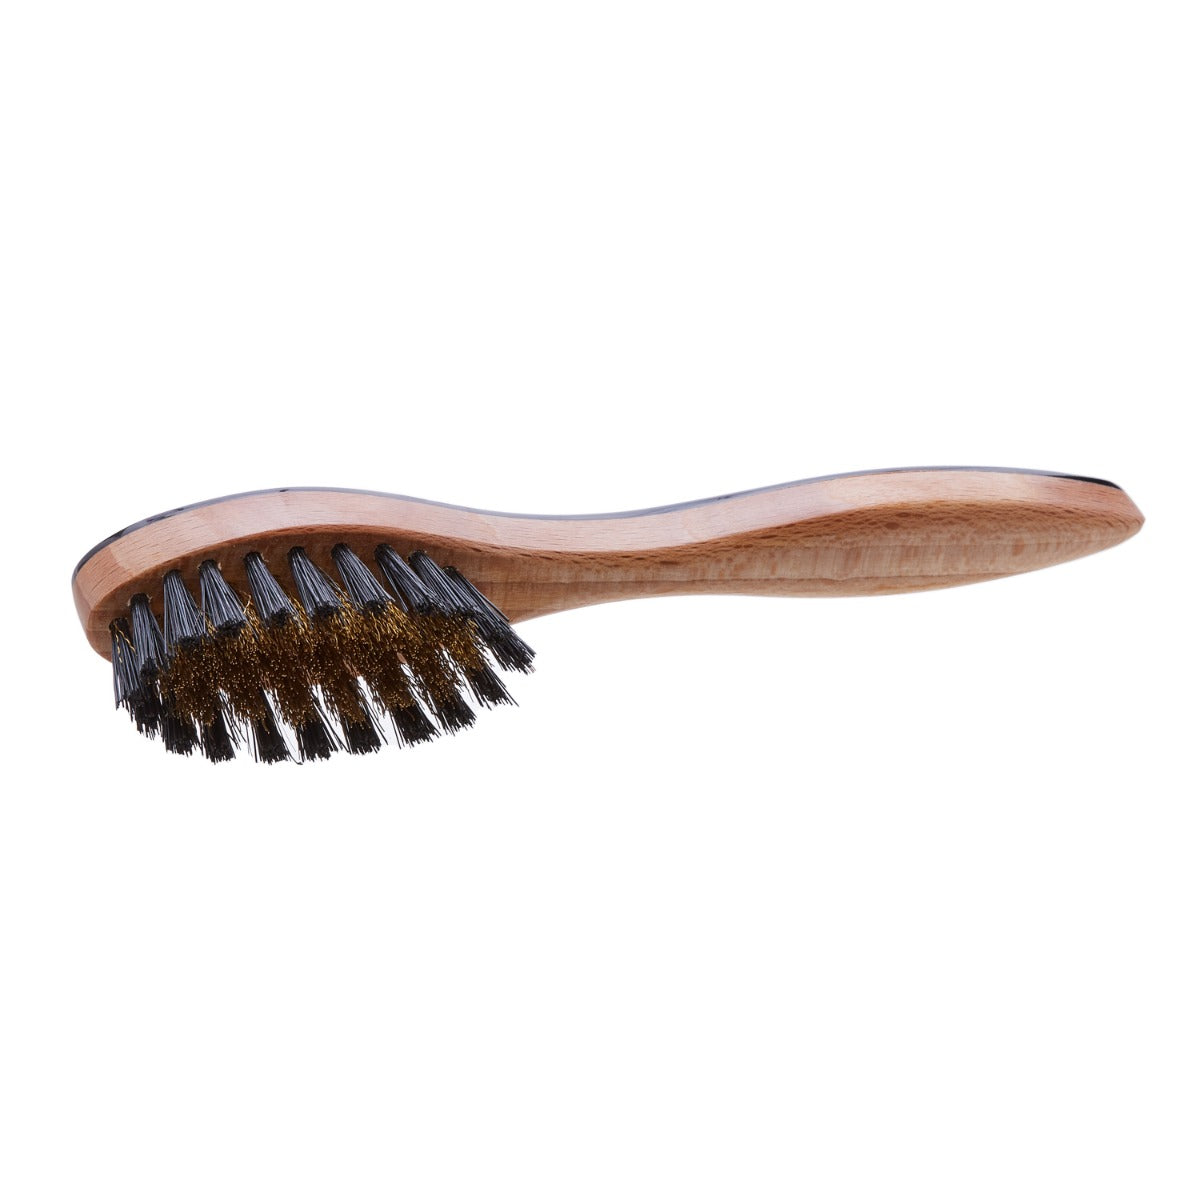 A Wellington Horn-Backed Suede Cleaning Brush from KirbyAllison.com for maintaining suede.